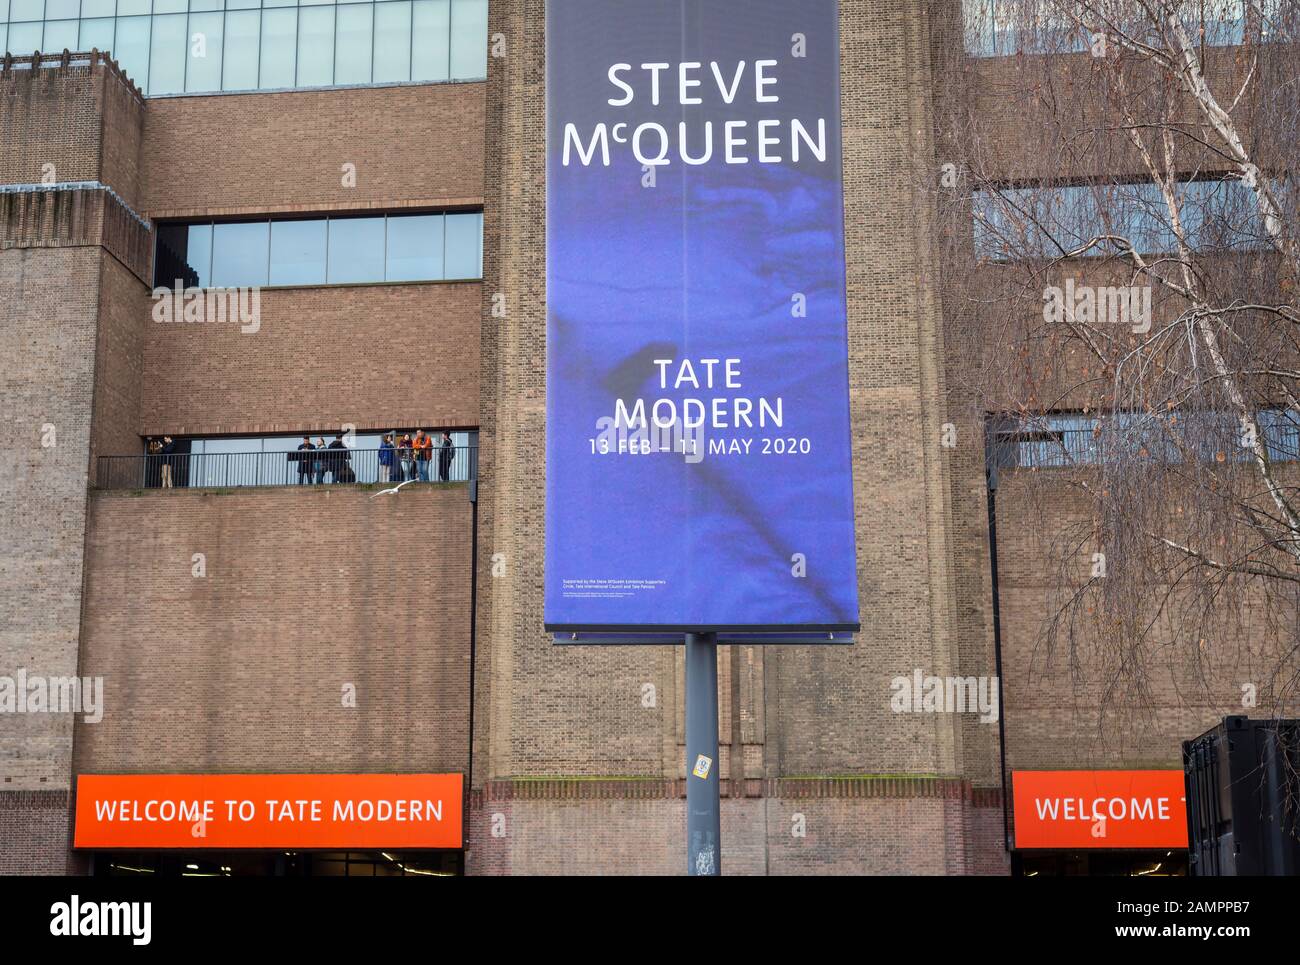 Banner outside Tate Modern in London advertising upcoming exhibition by Steve McQueen which will take place between 13 February and 11 May 2020. Stock Photo